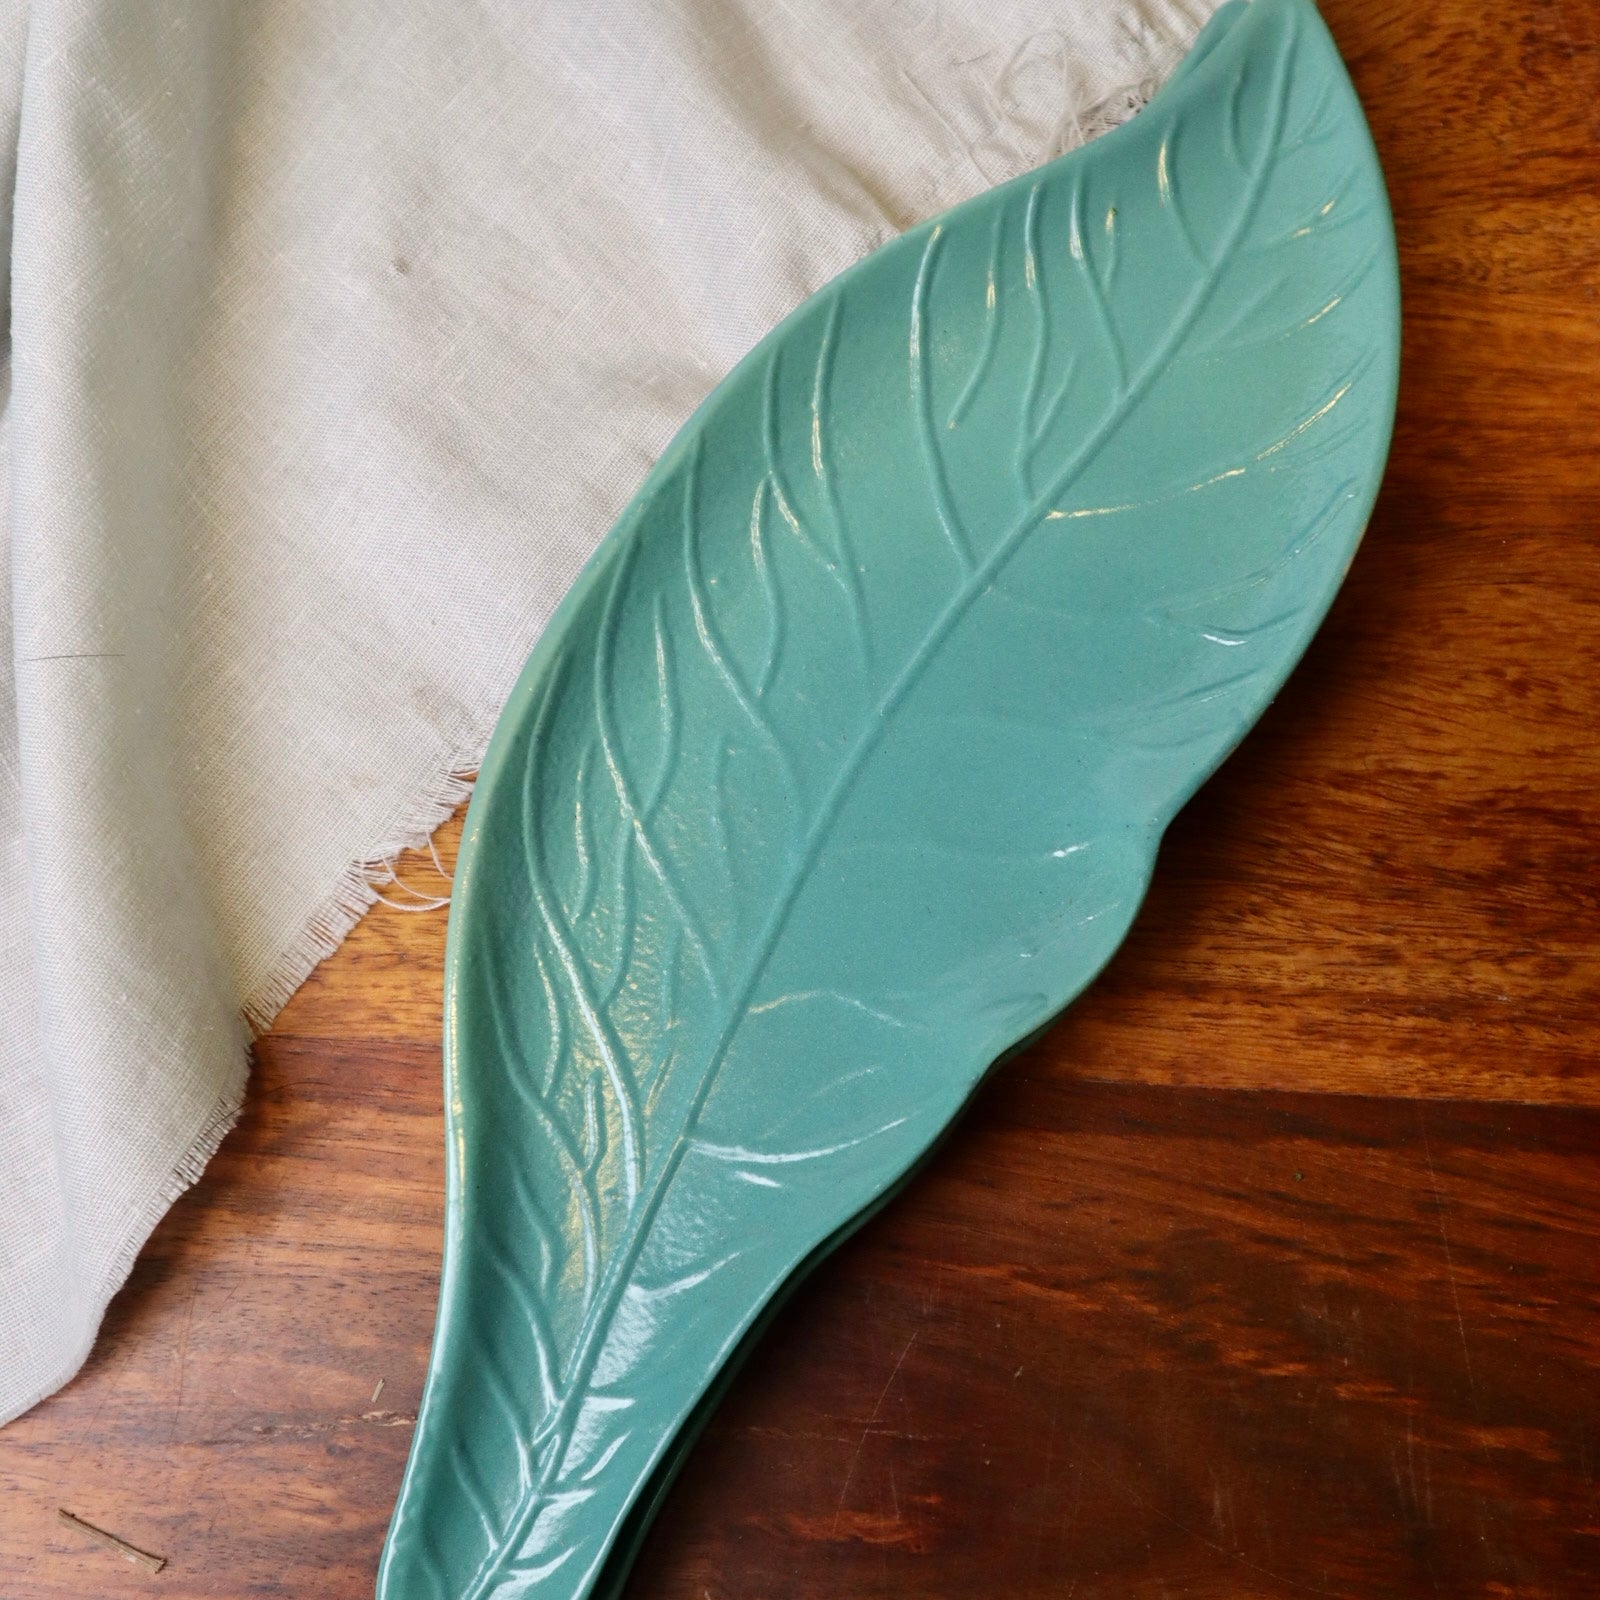 Green leaf shaded platter on wooden surface